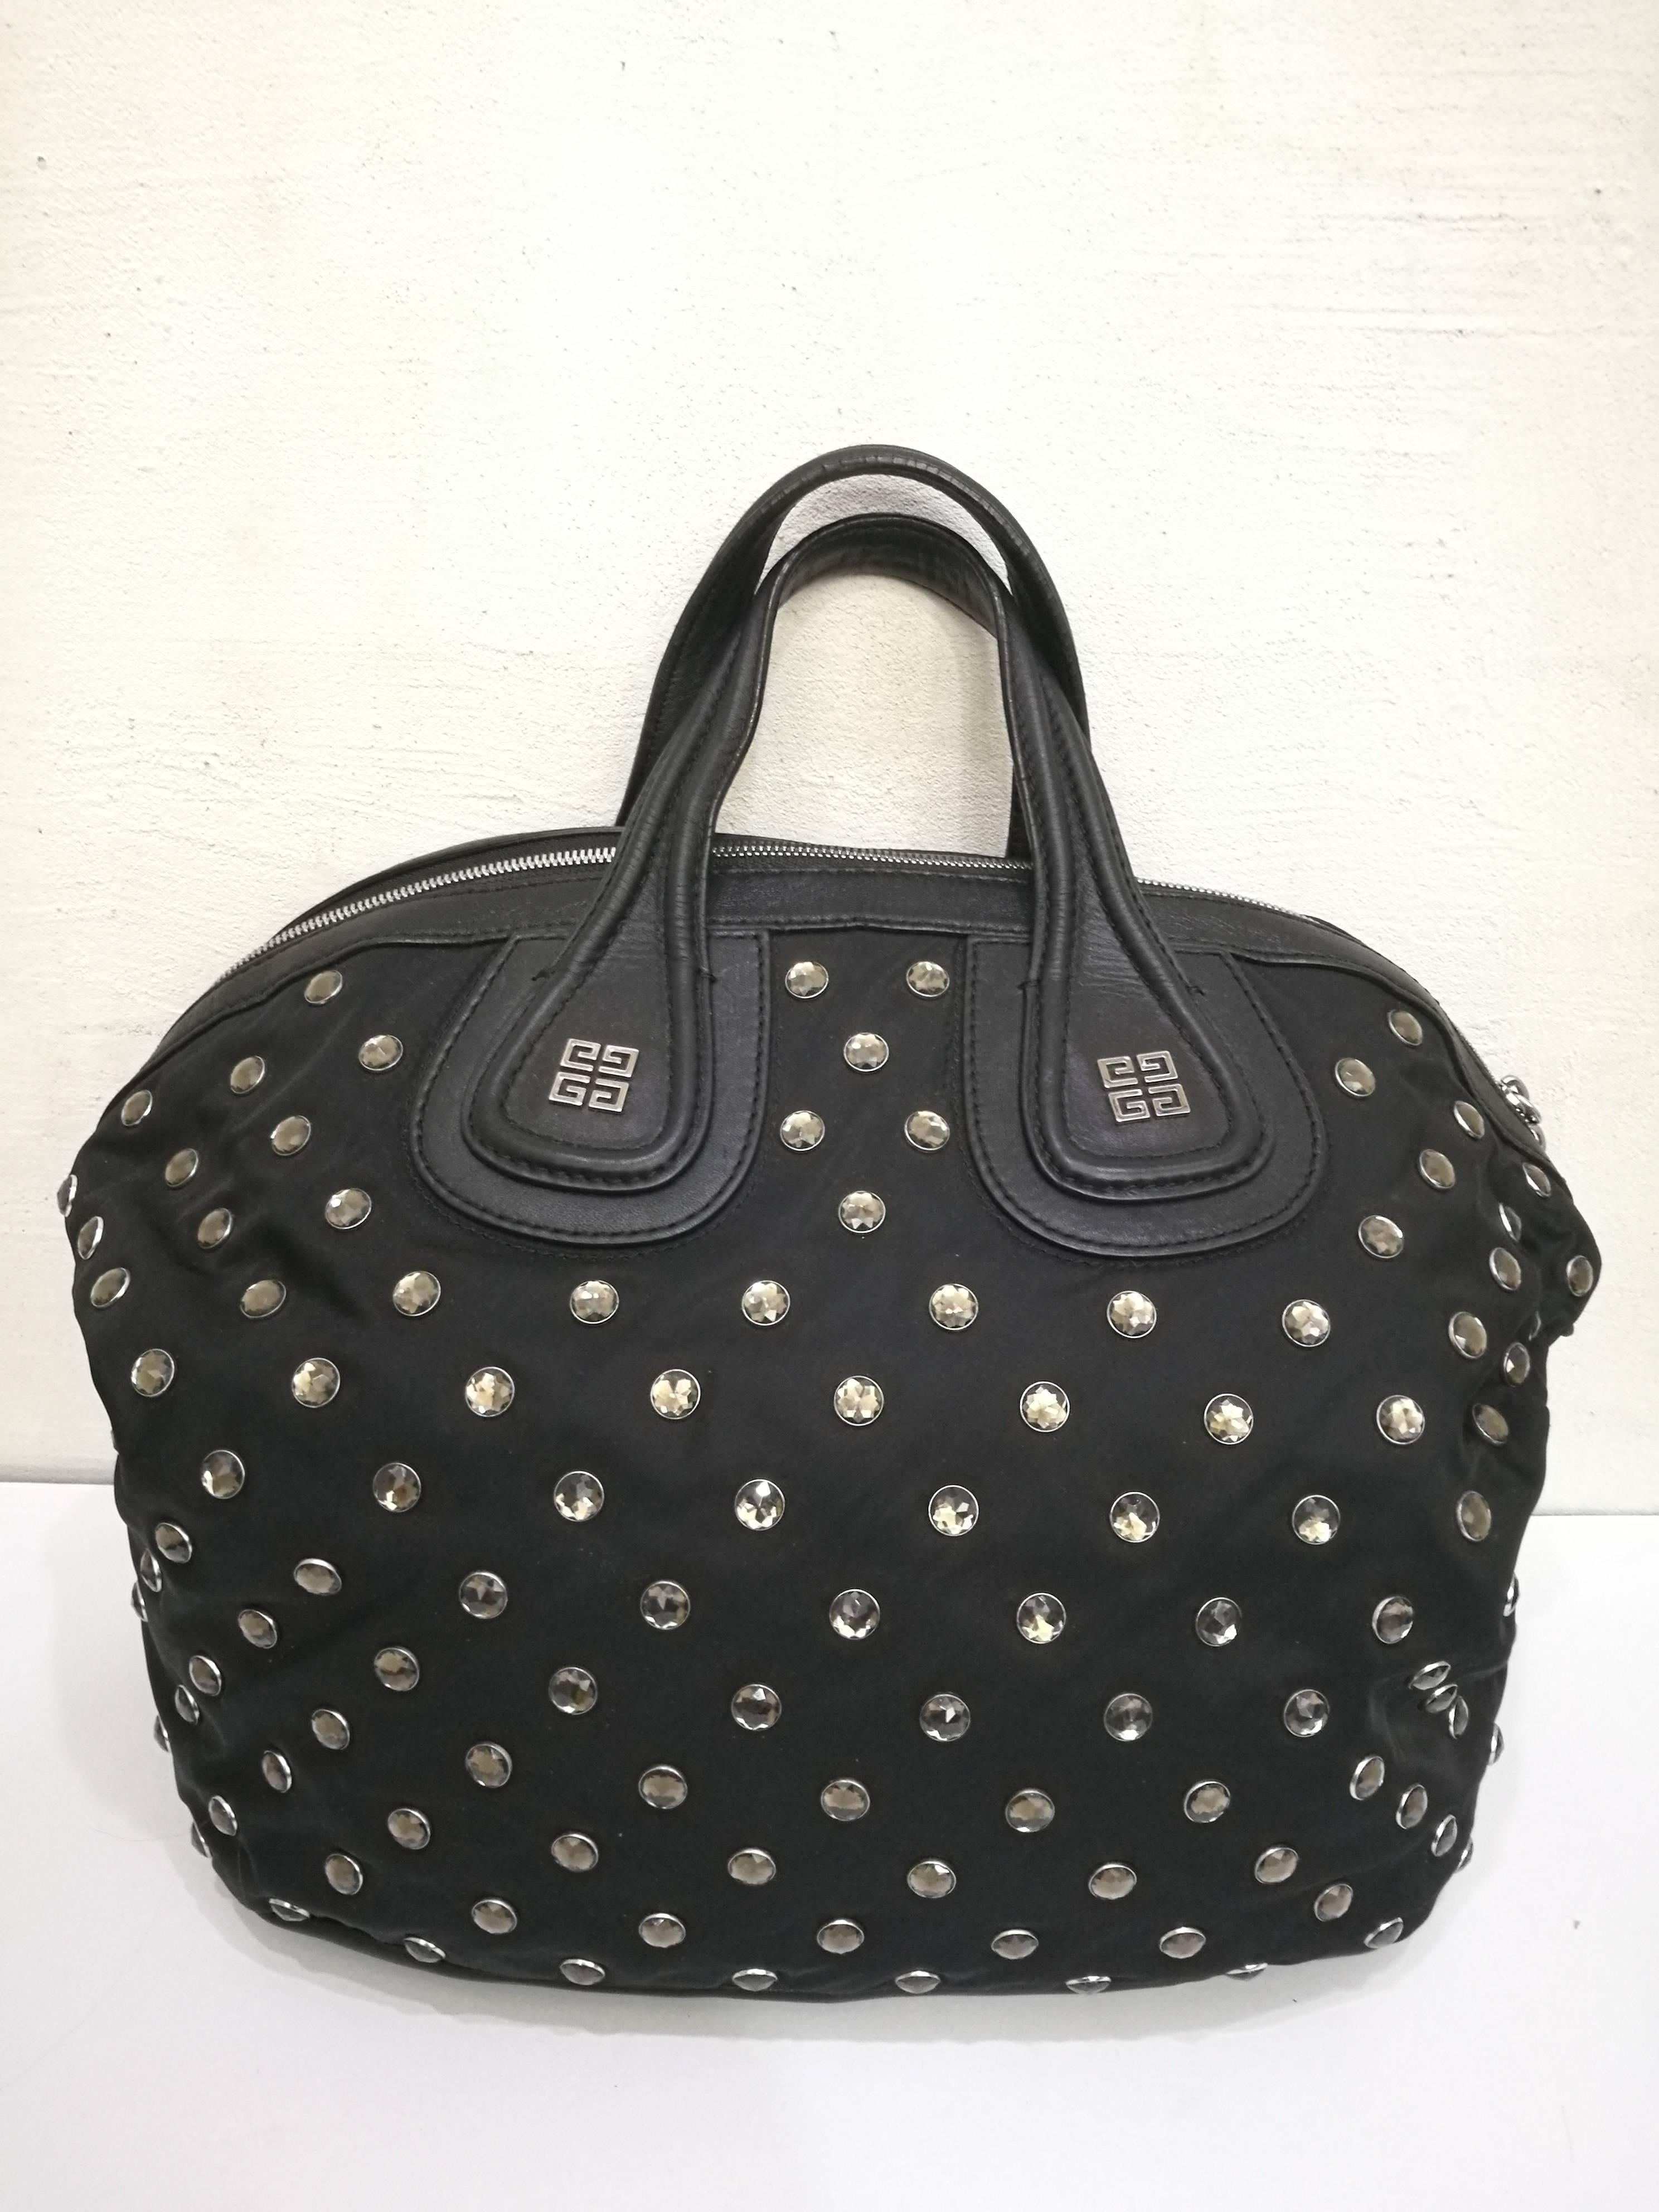 Givenchy Nightingale Black Bag with crystal swarovski all over
Totally made in china
Total lenght with handle 43 cm